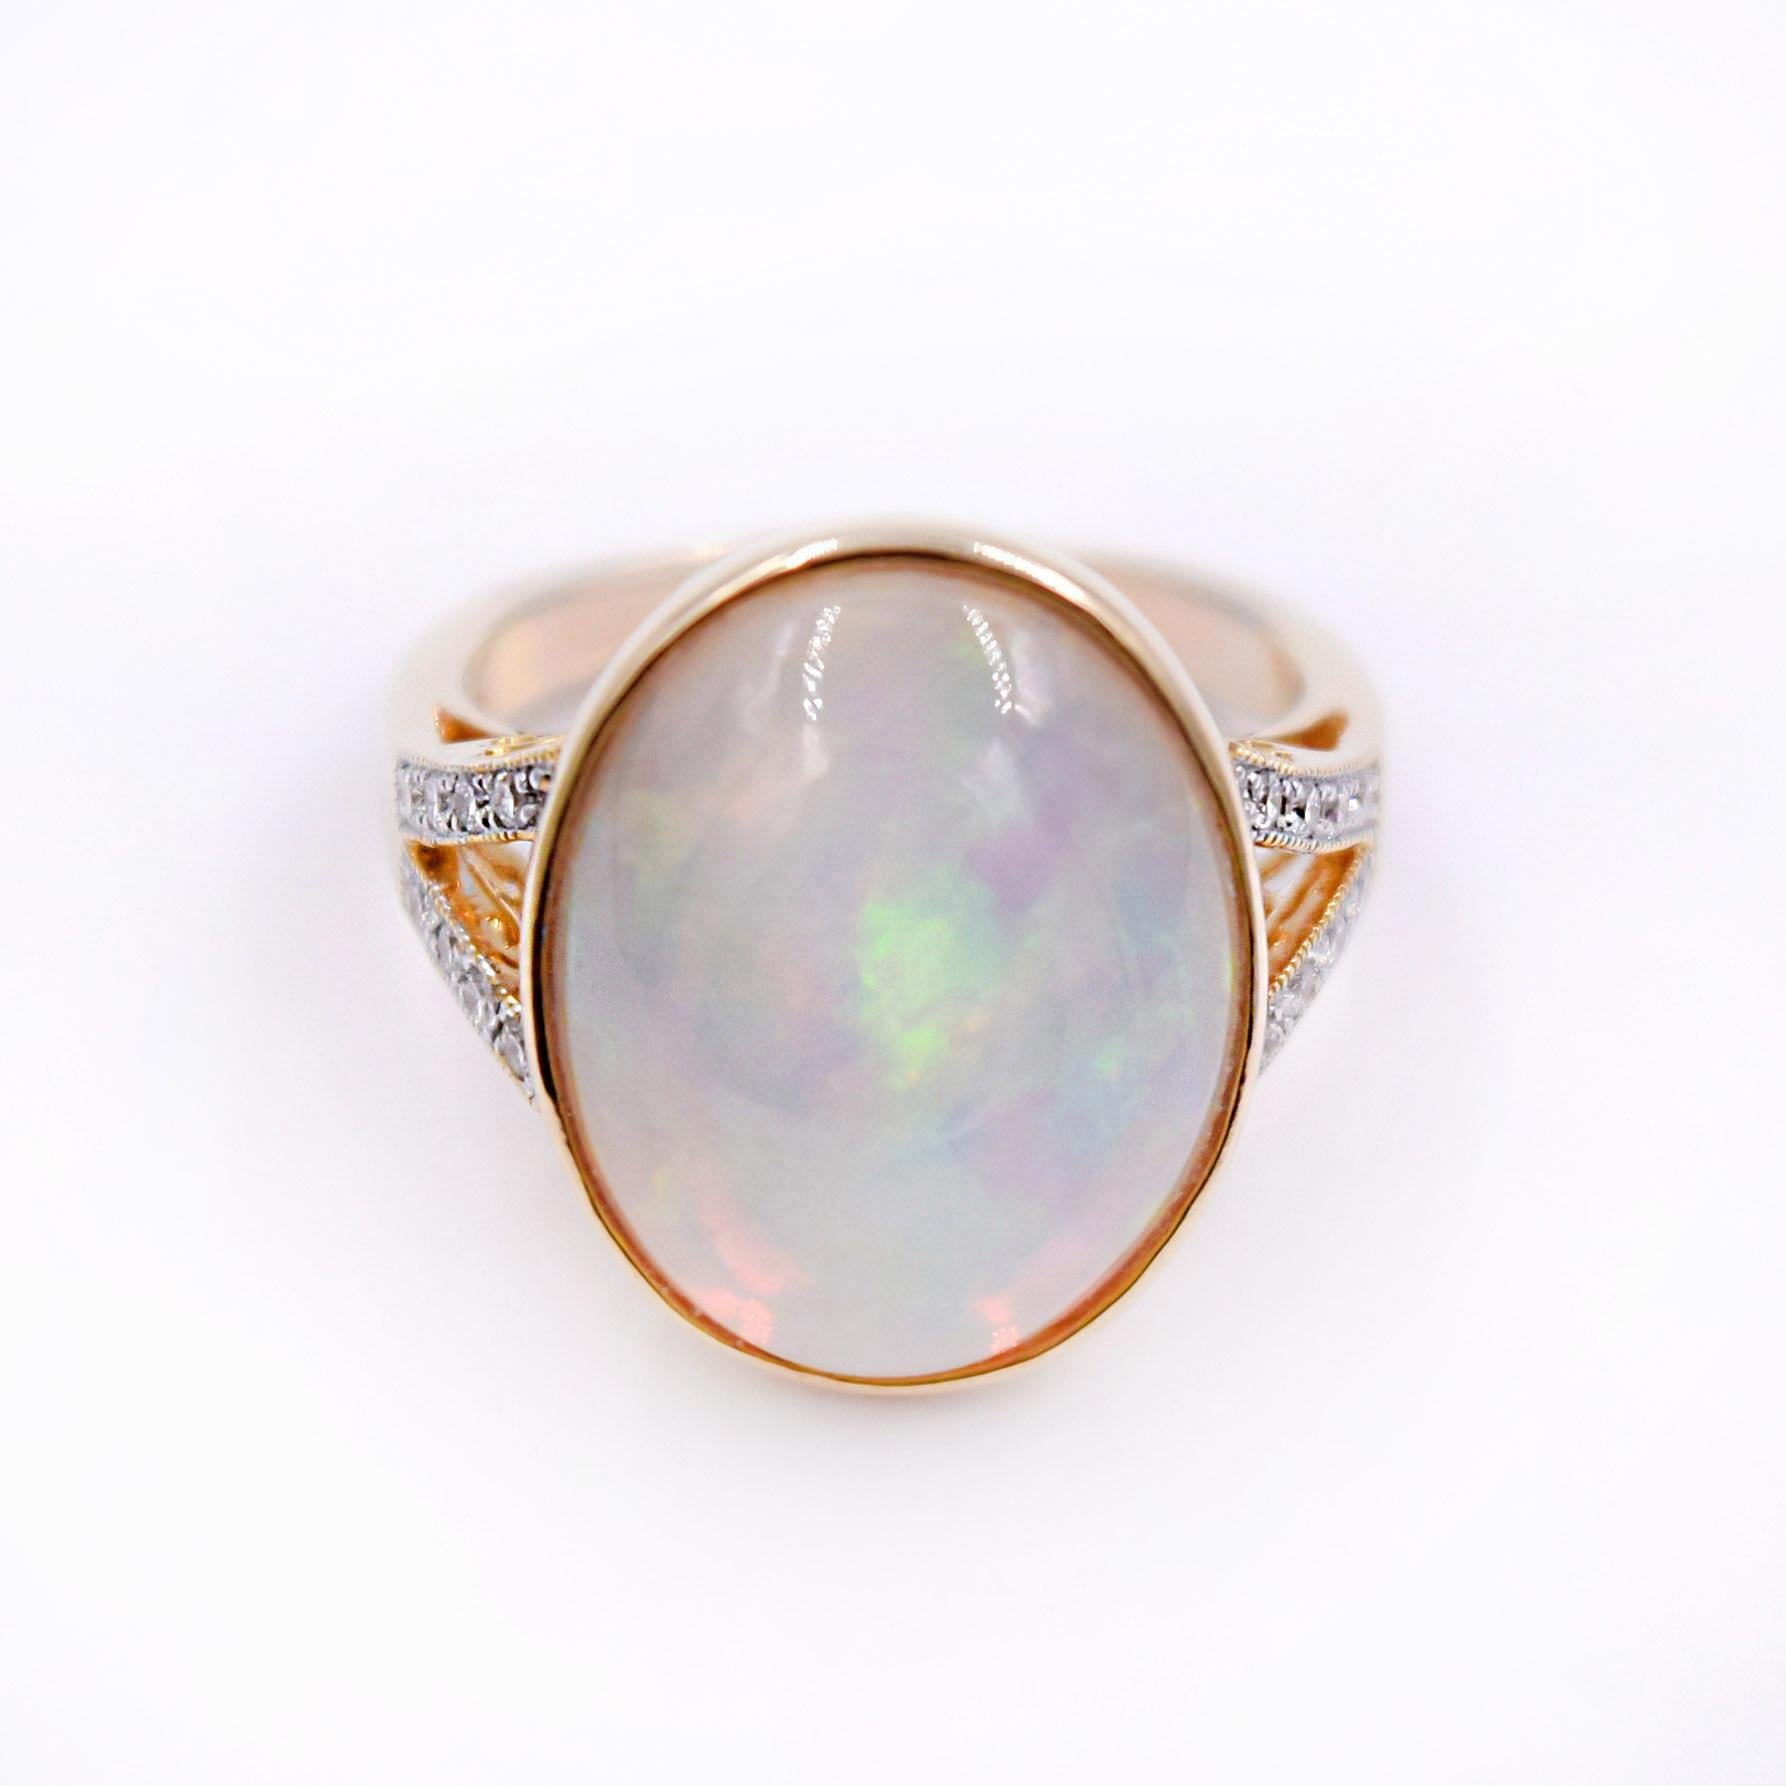 8.09 Carat Ethiopian Opal and 0.18 Carat White Diamonds are set in  14 Karat Yellow Gold.
The size of the ring is 7.5 and can be sized.